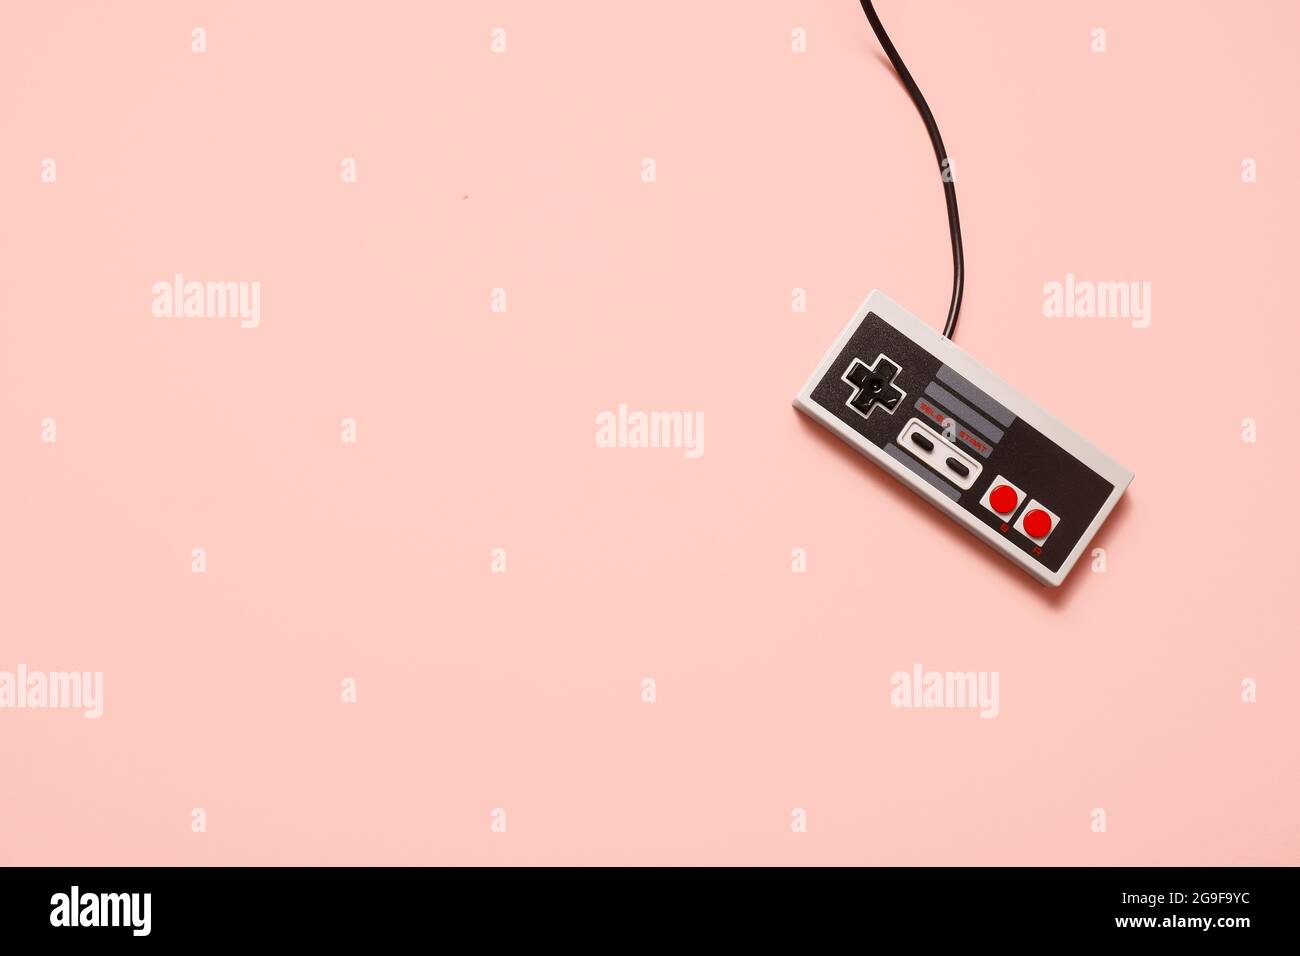 Retro vintage grey game console video game controller on a pastel pink background with copy space and room for text. Stock Photo